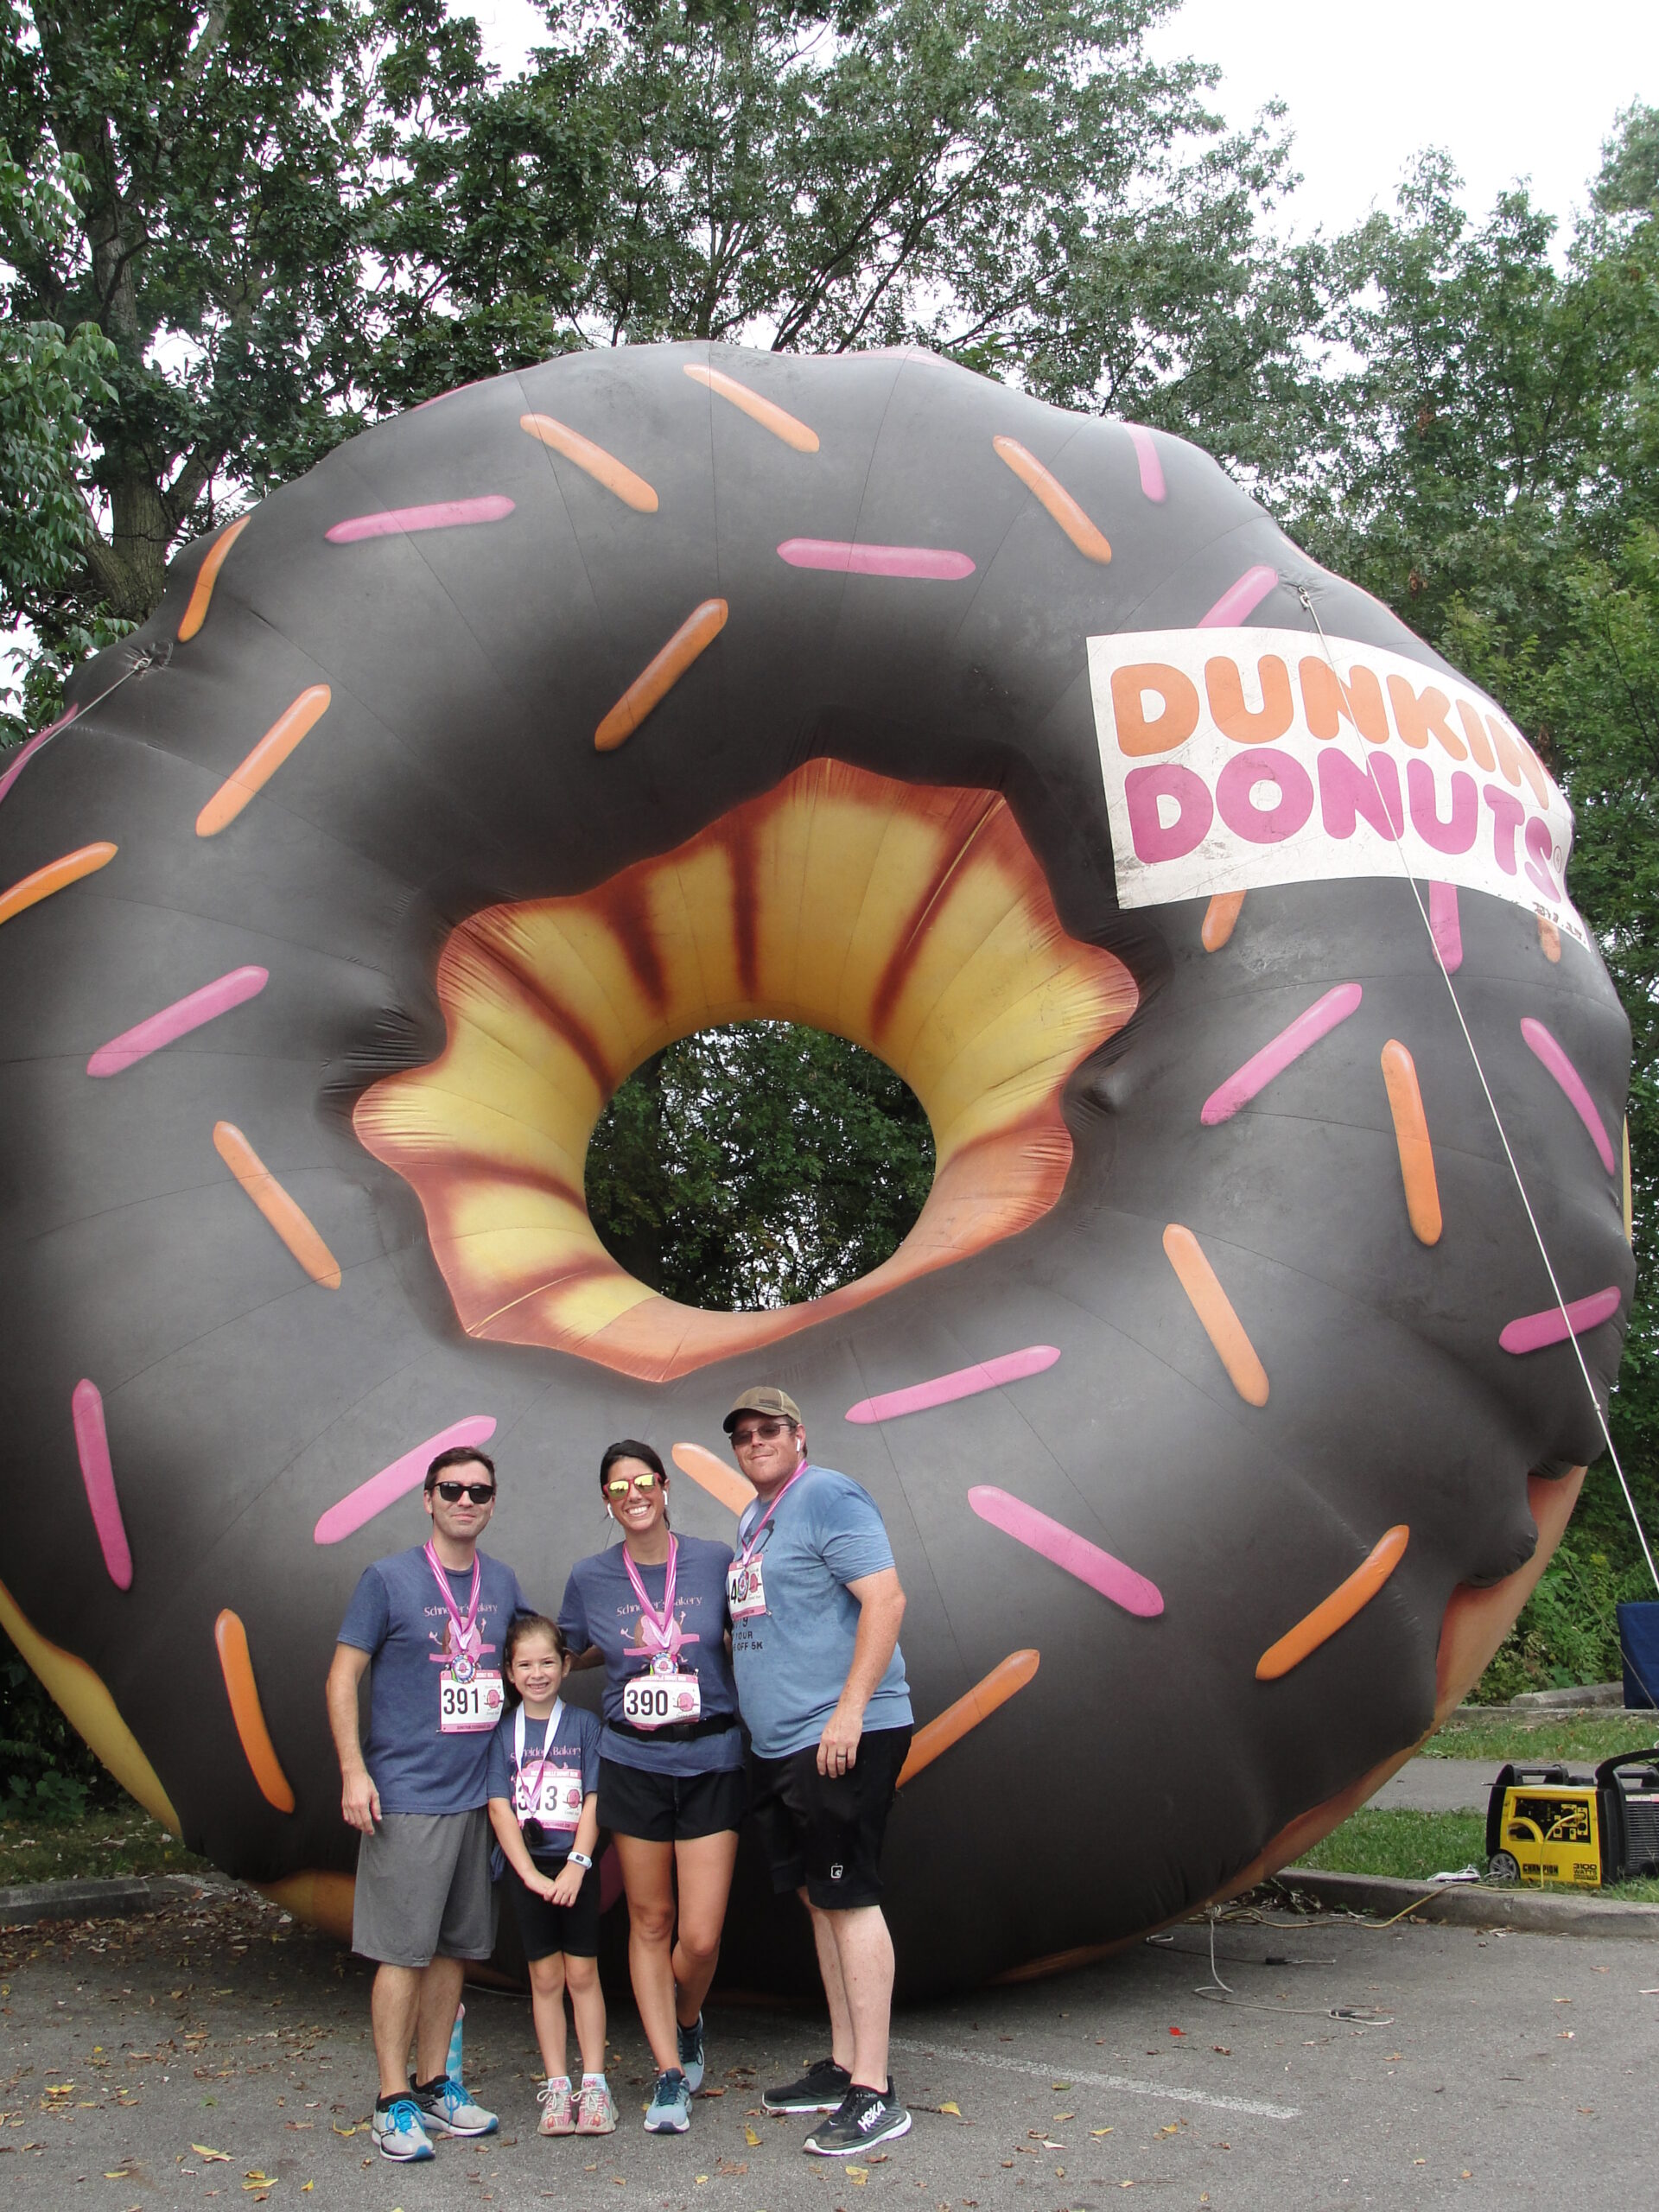 Westerville Donut Run - Columbus Donut Run and Walk - Huge Donut Inflatable - USA Race Timing - Chip Timing - Race Timing Ohio - Doughnut 5k